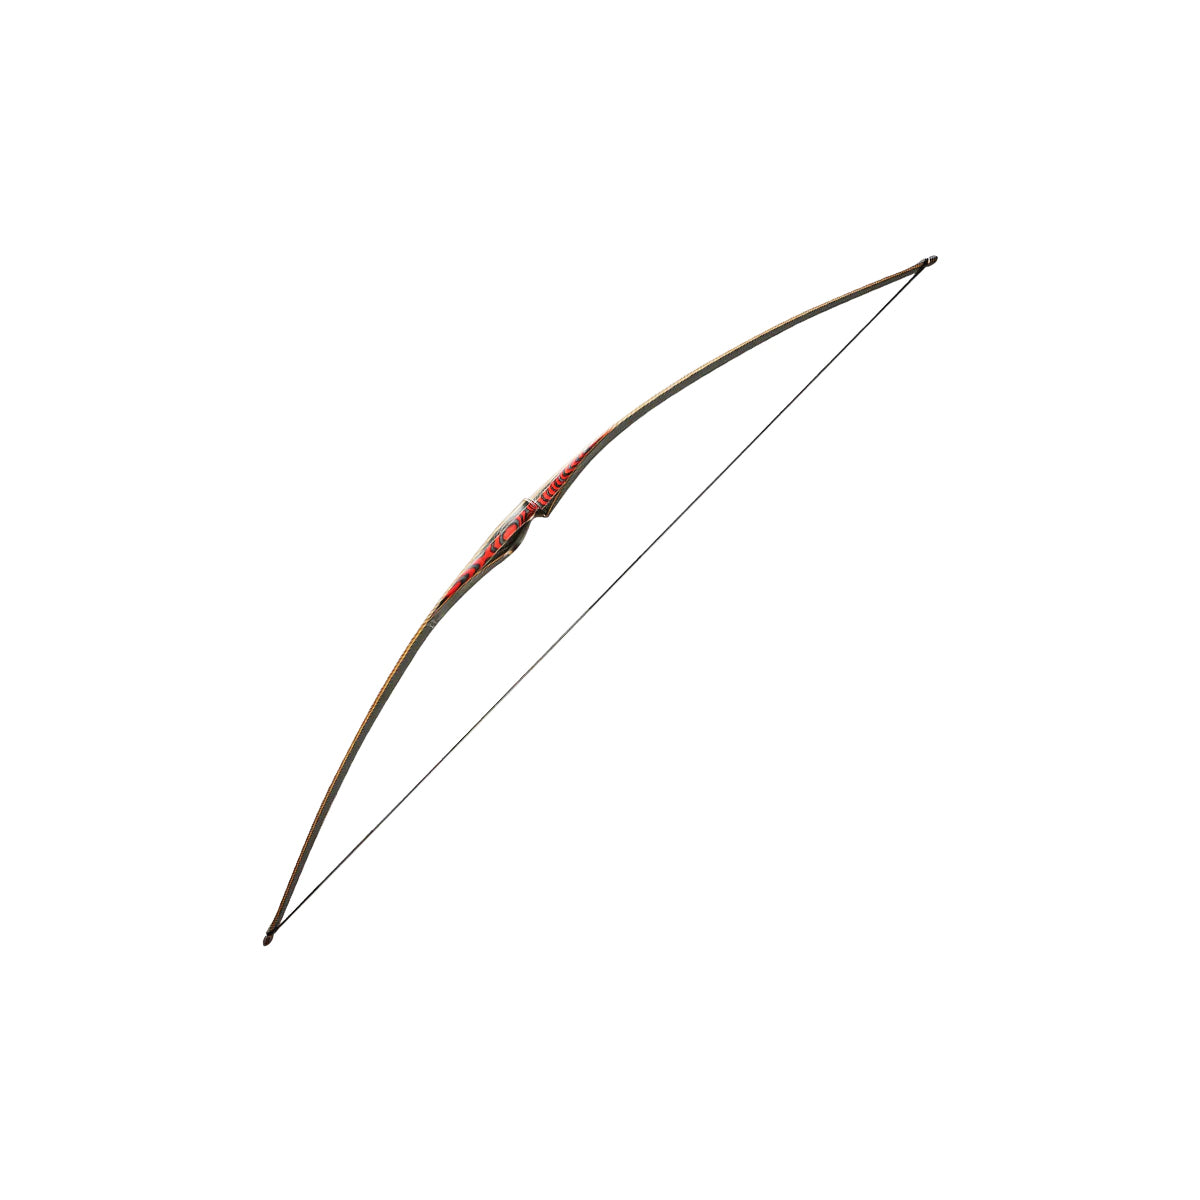 Old Mountain Archery Symphony Longbow 68 Carbon